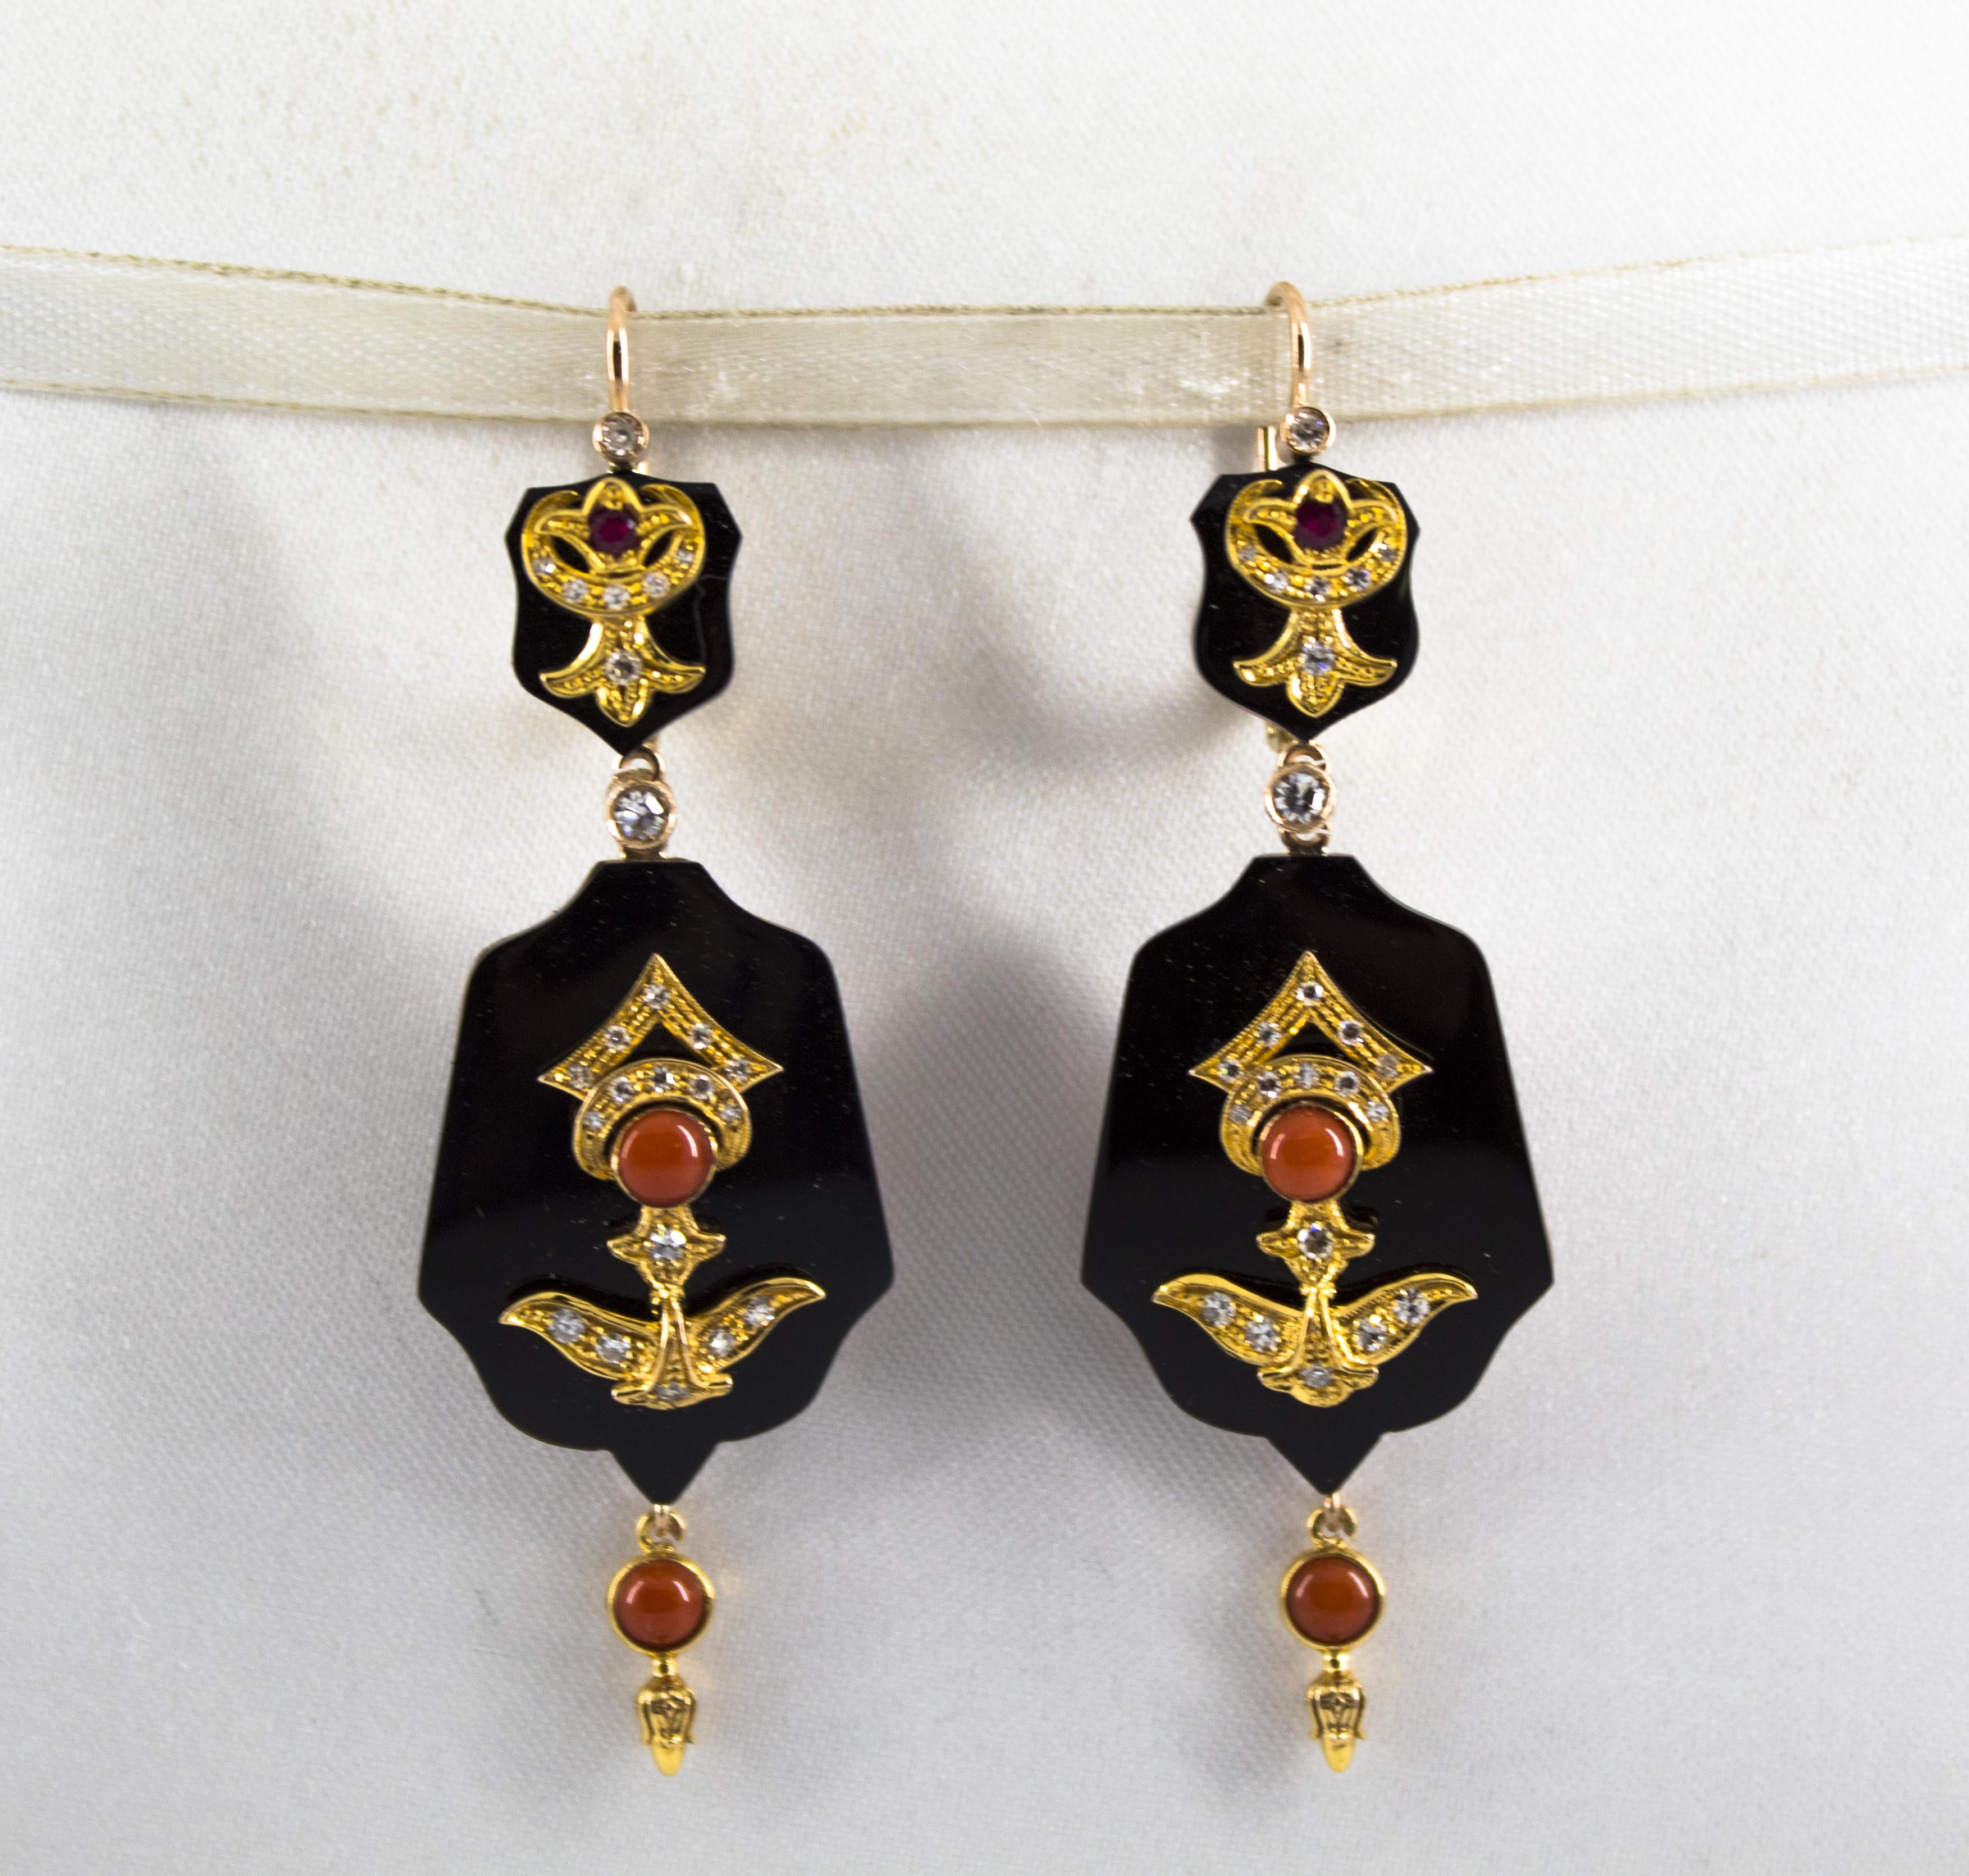 These Earrings are made of 14K Yellow Gold.
These Earrings have 0.60 Carats of White Diamonds.
These Earrings have 0.15 Carats of Rubies.
These Earrings have also Onyx, Red Coral.
All our Earrings have pins for pierced ears but we can change the